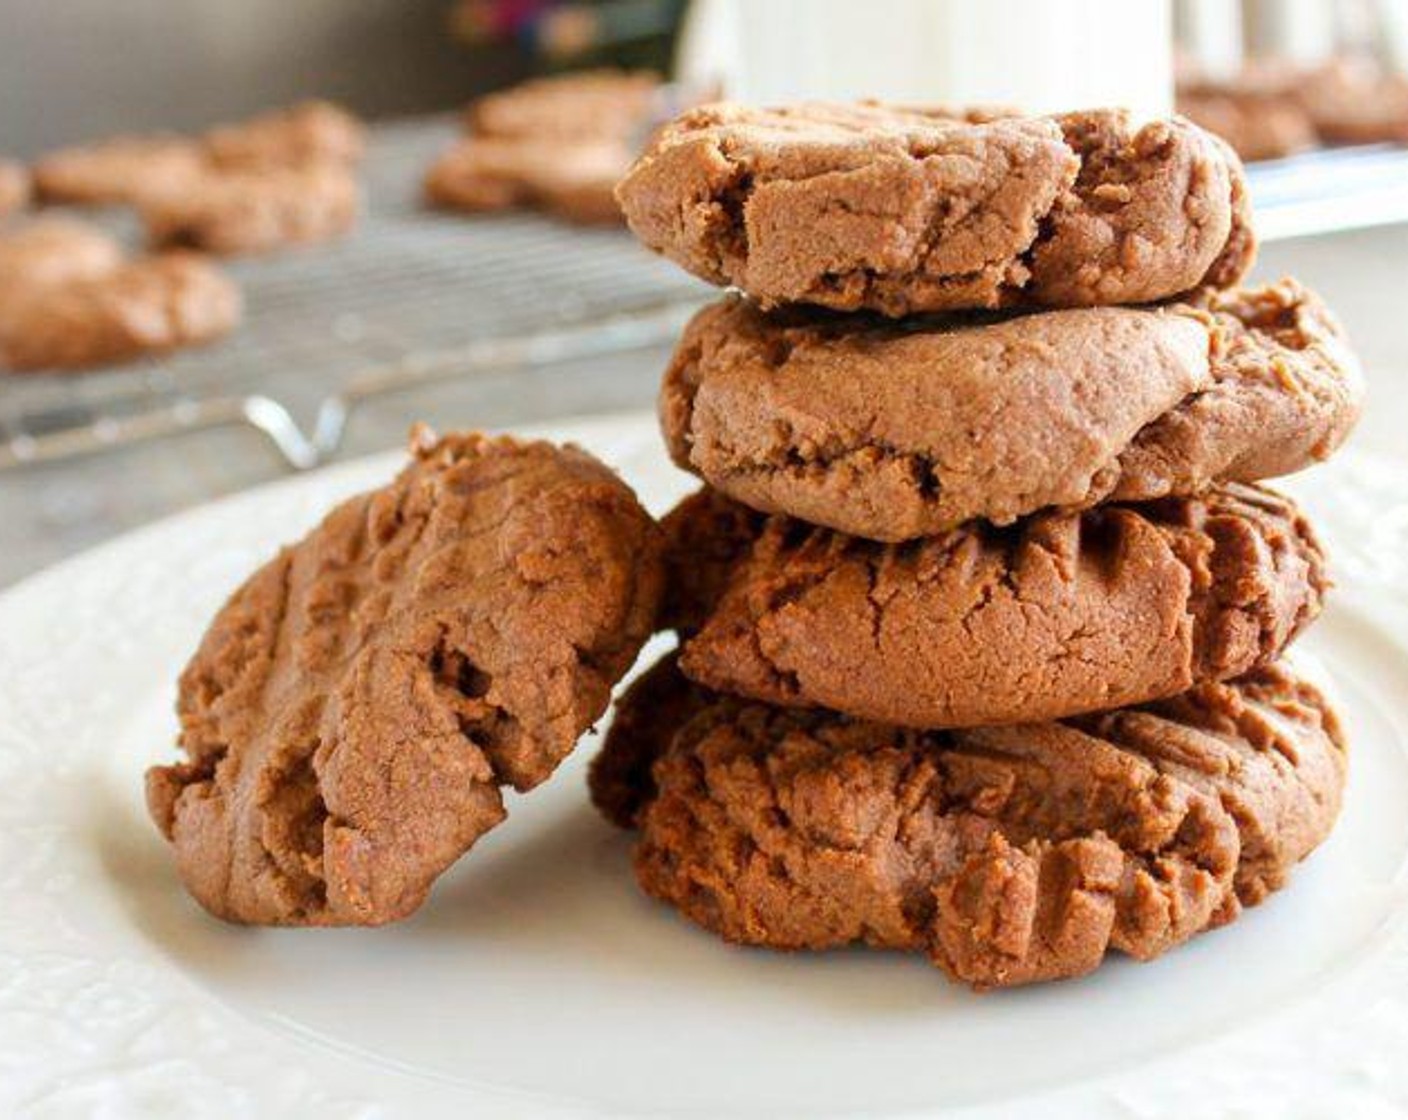 Peanut Butter Cocoa Cookies